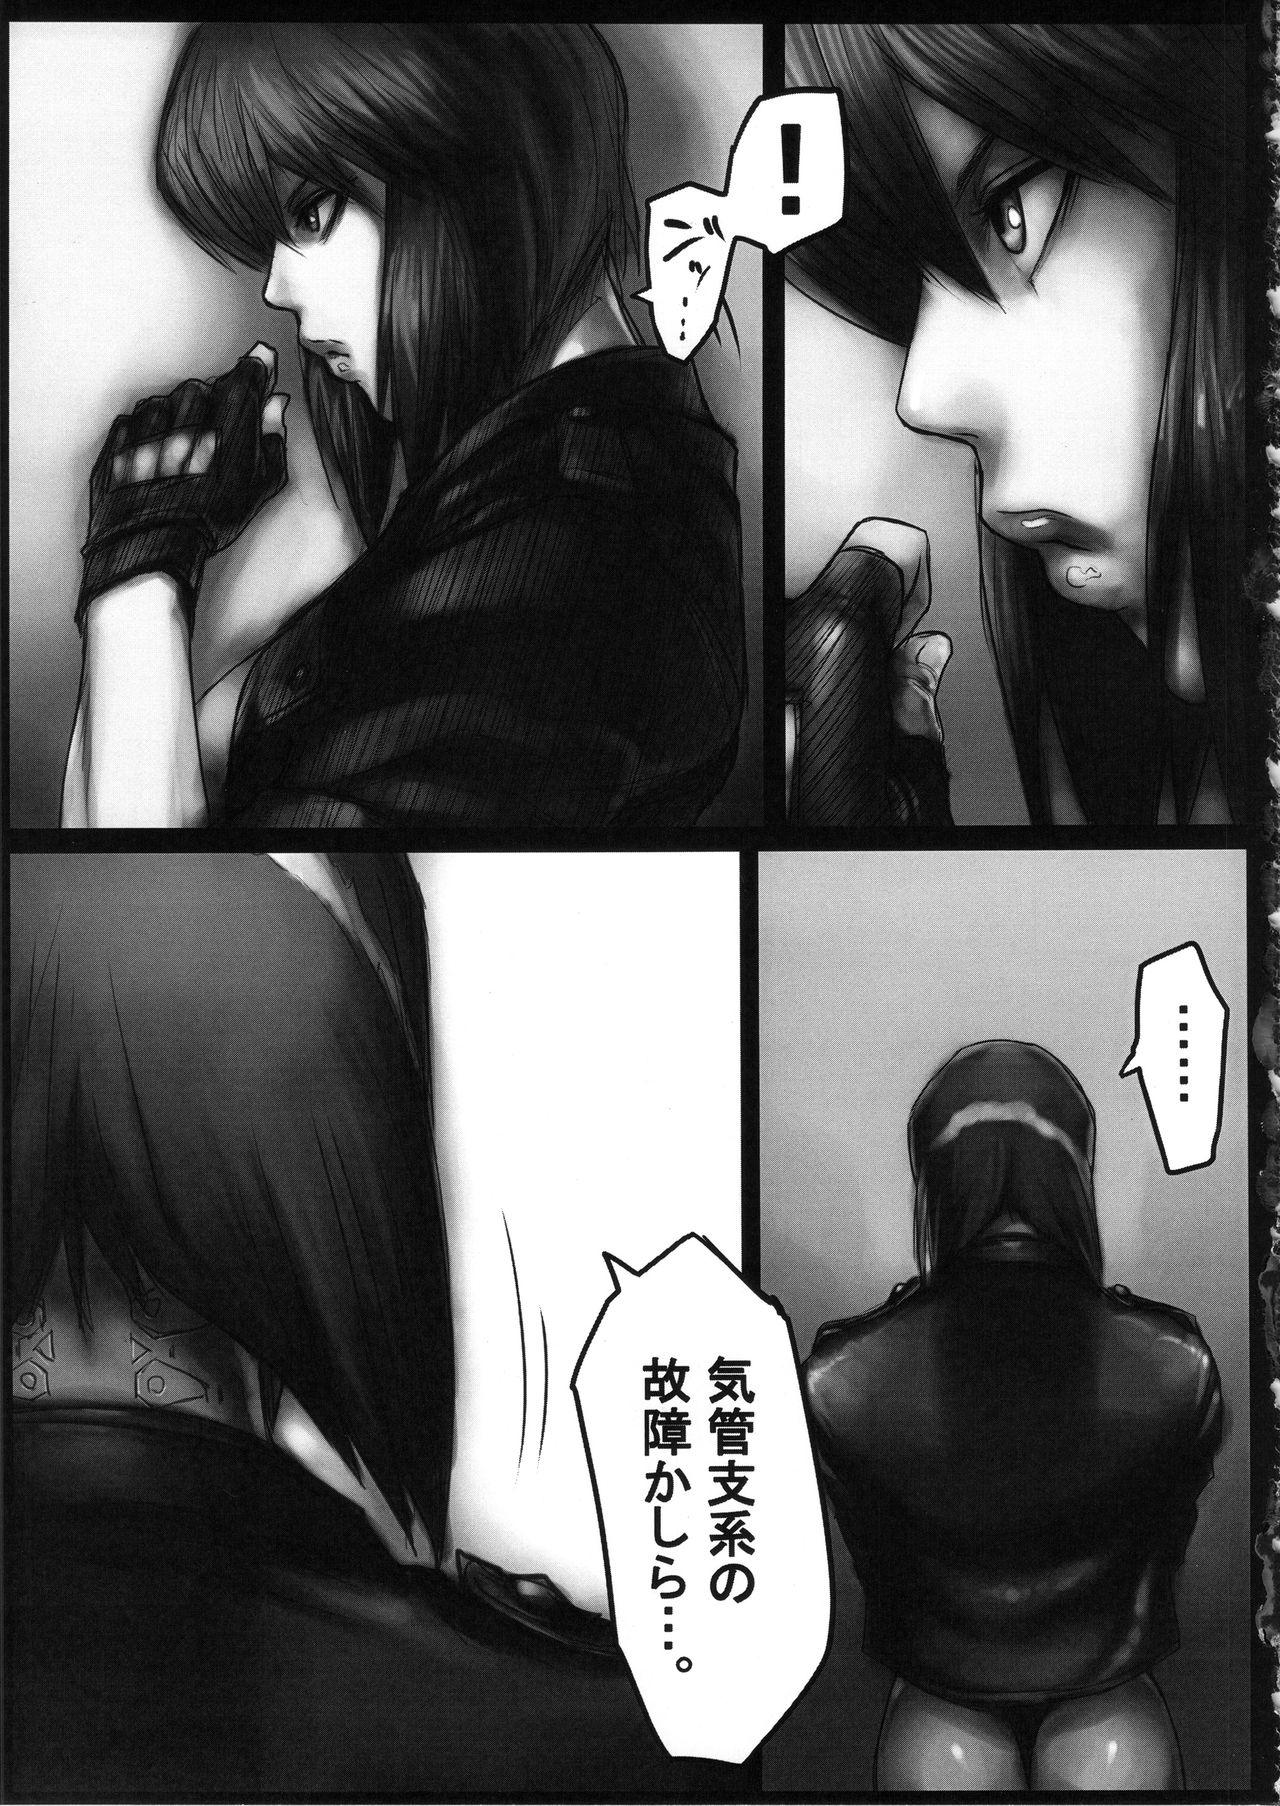 Harcore Kouin Mesu Gorilla - Ghost in the shell Gayemo - Page 4